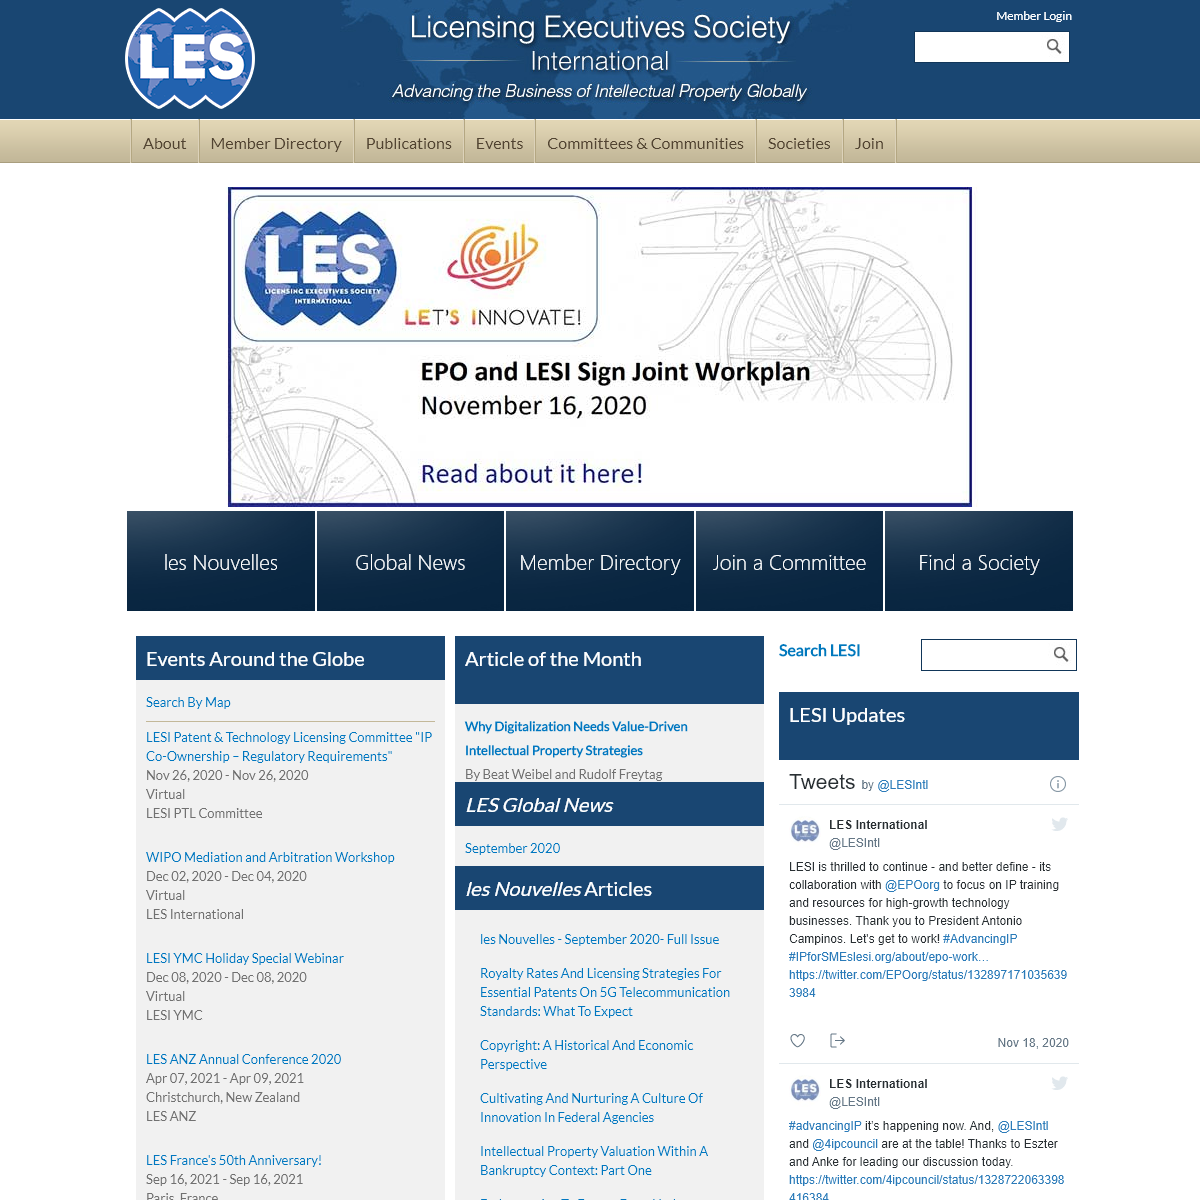 A complete backup of lesi.org